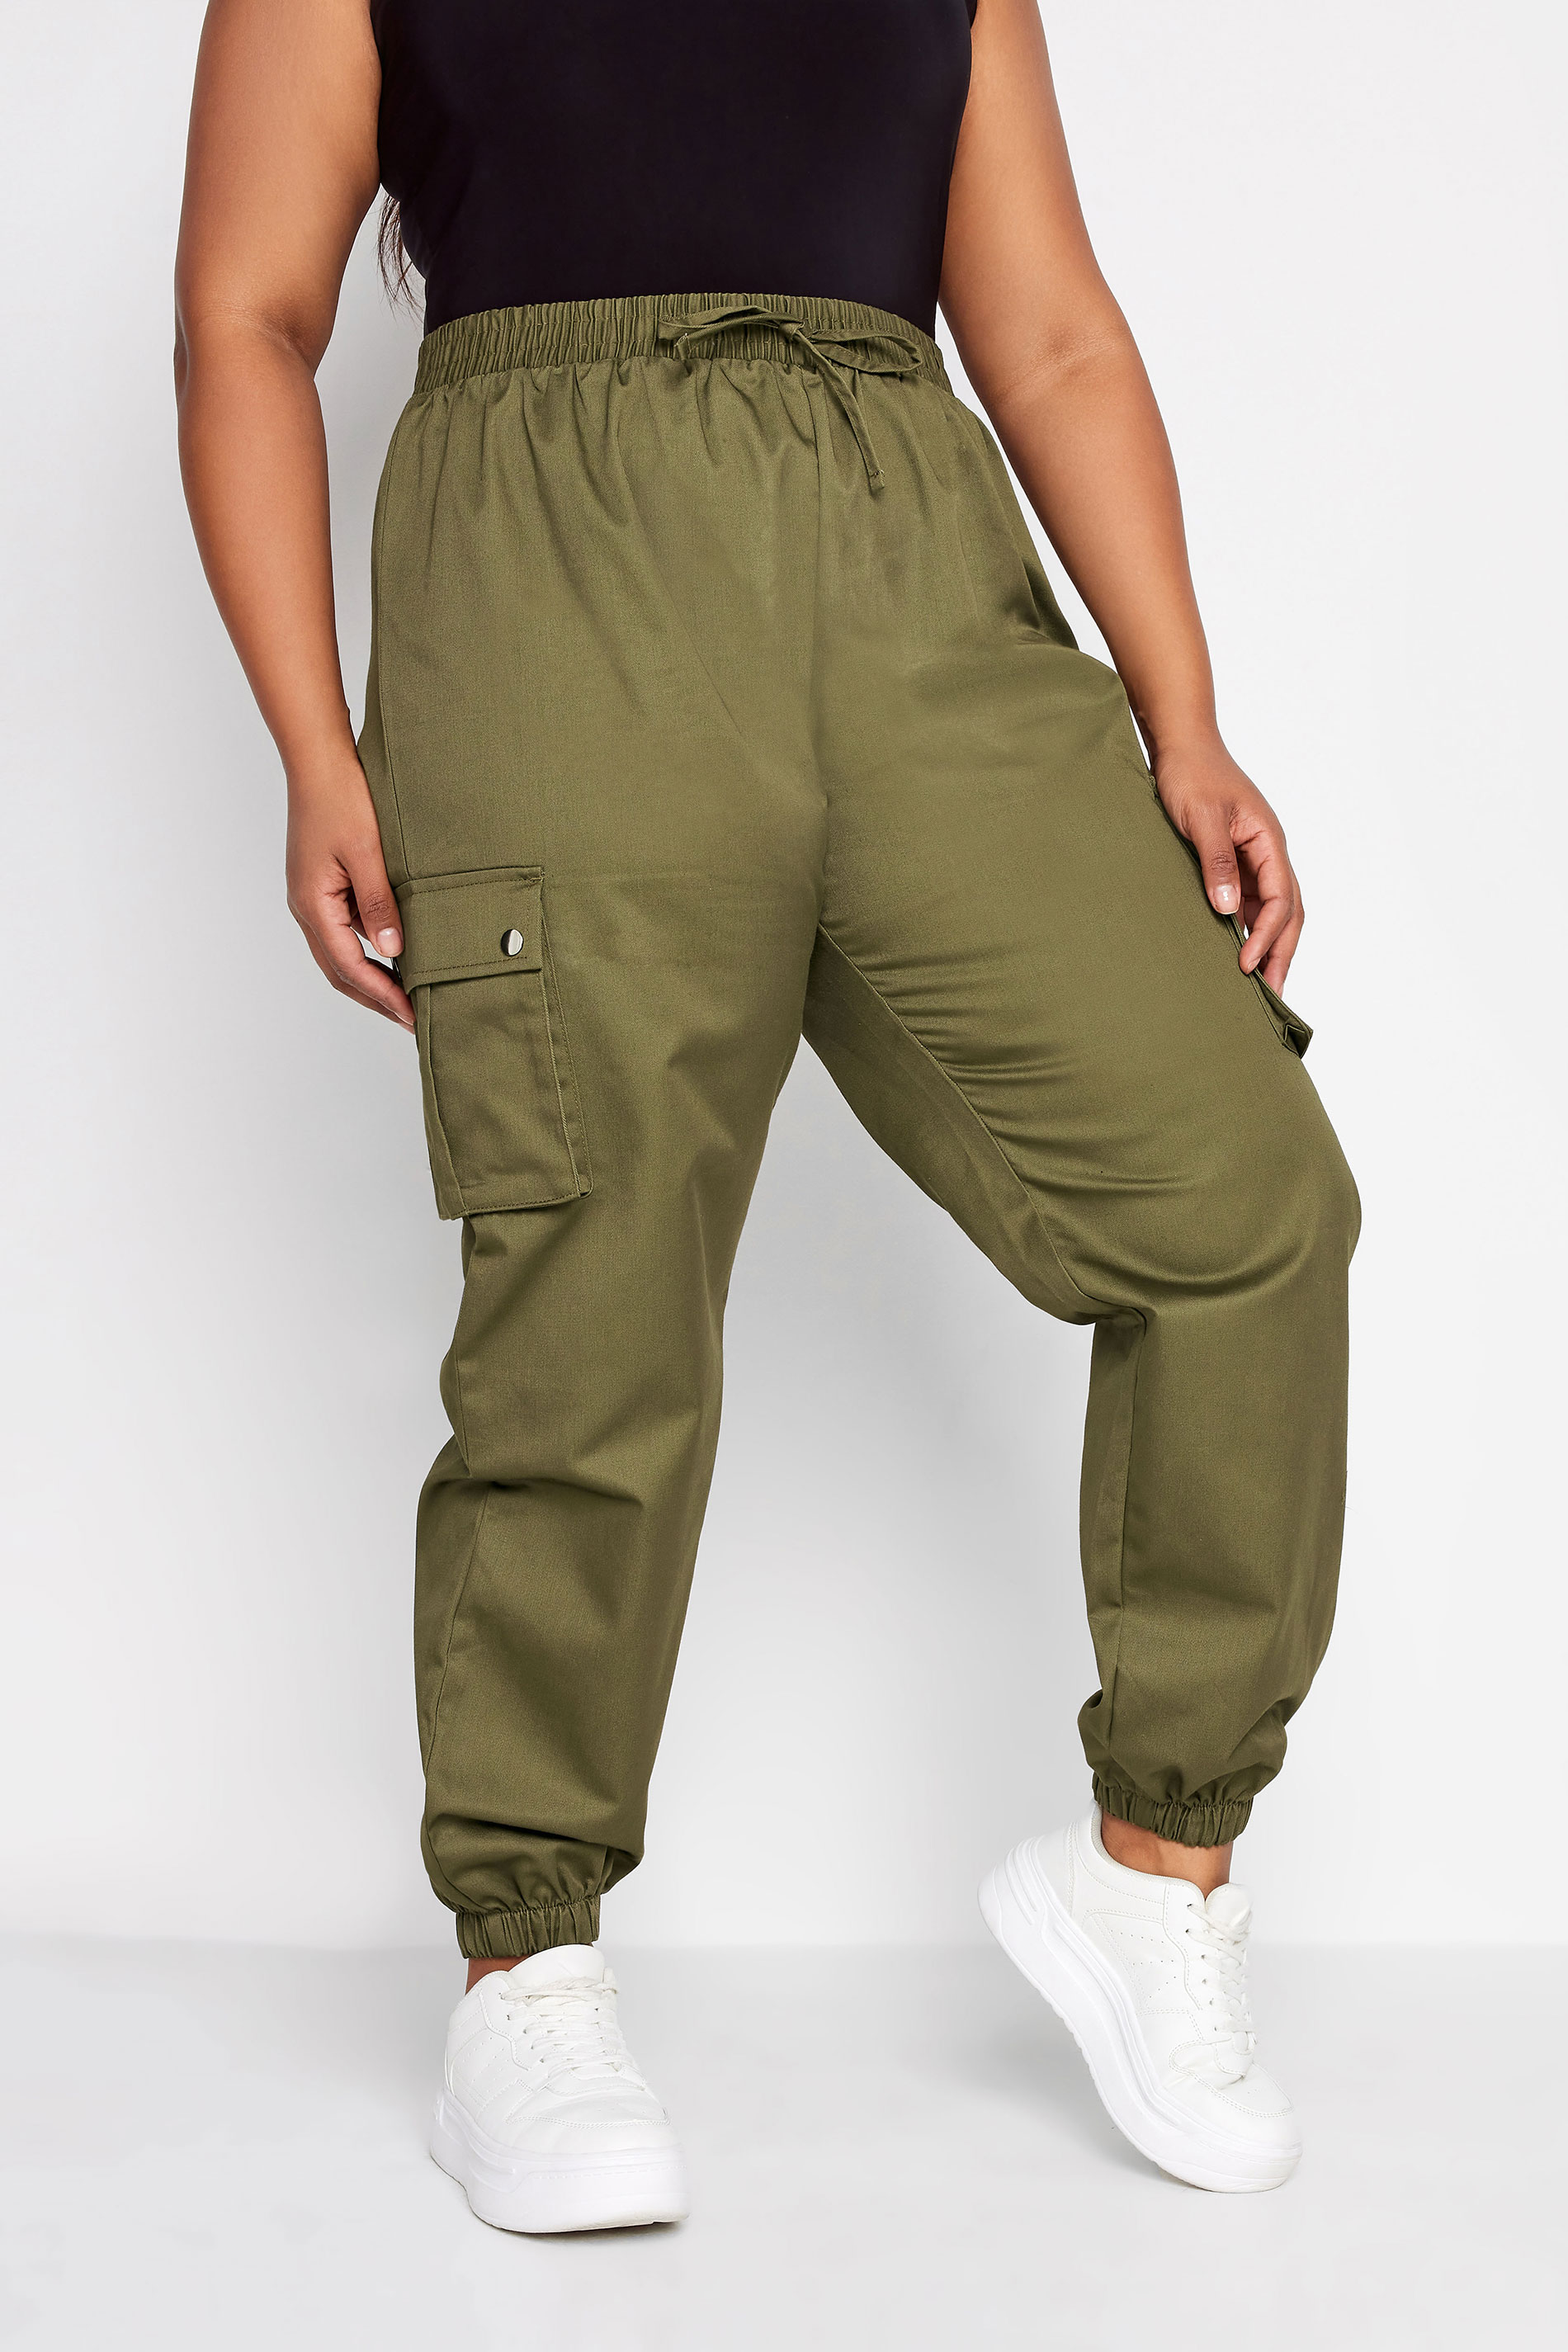 YOURS Curve Khaki Green Cuffed Cargo Trousers | Yours Clothing 2